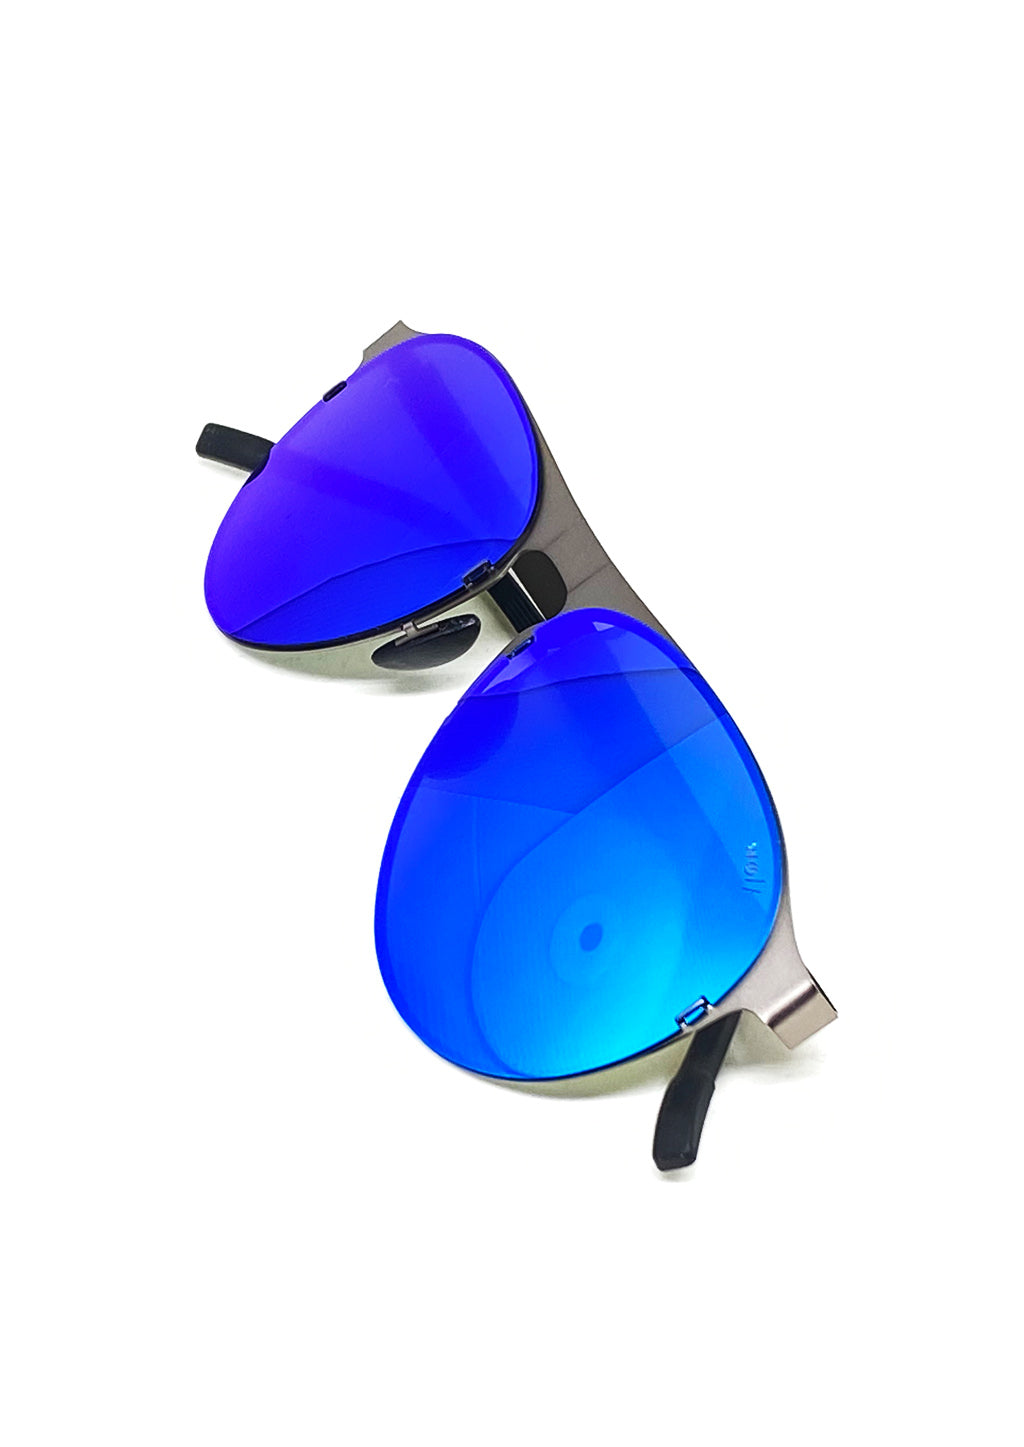 Foldable sunglasses - Scout classic aviator design - From above with blue lenses.